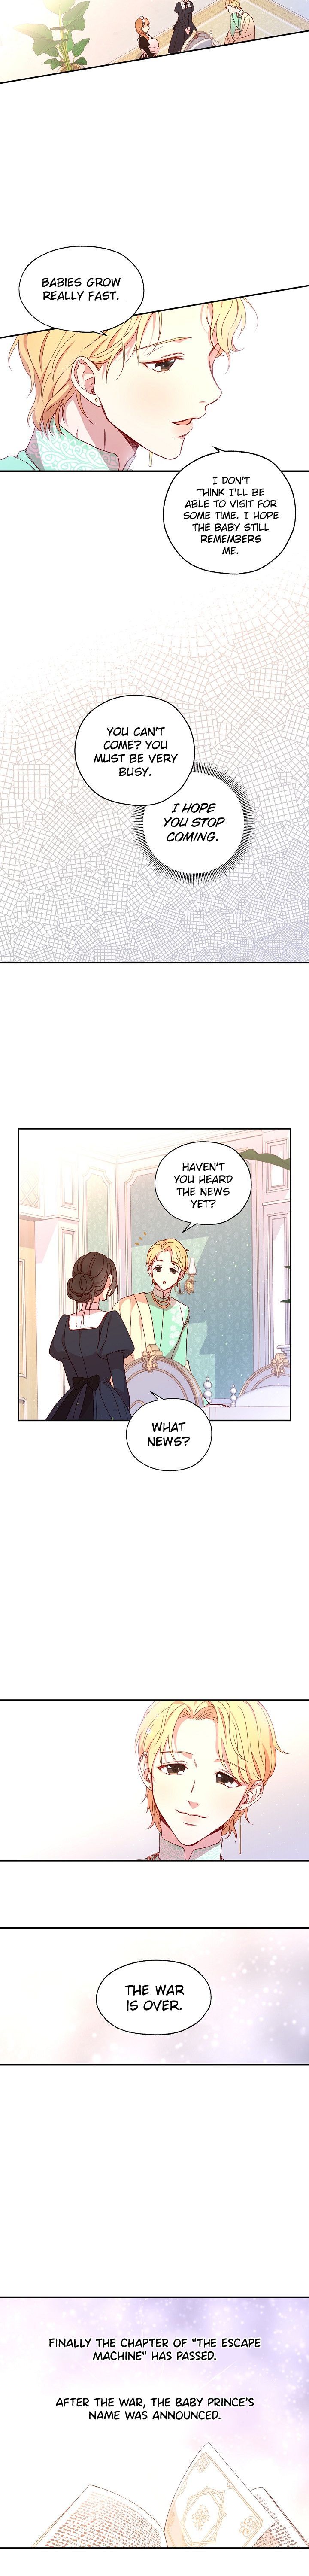 Surviving As A Maid - Chapter 10 Page 2